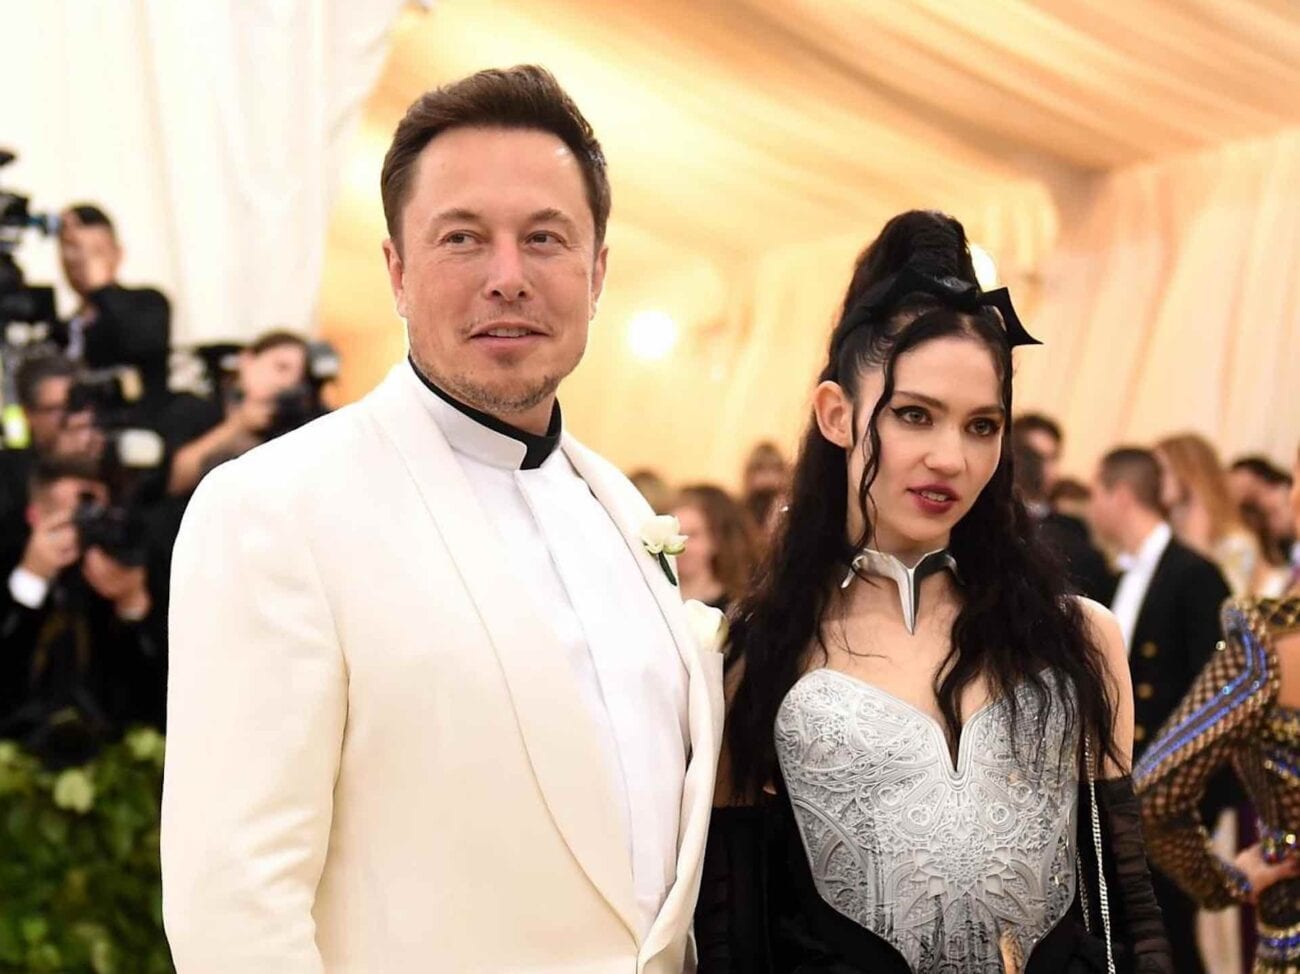 There have been many strange celebrity couples, but Elon Musk & Grimes are definitely in the top ten. Here are some of the best memes.